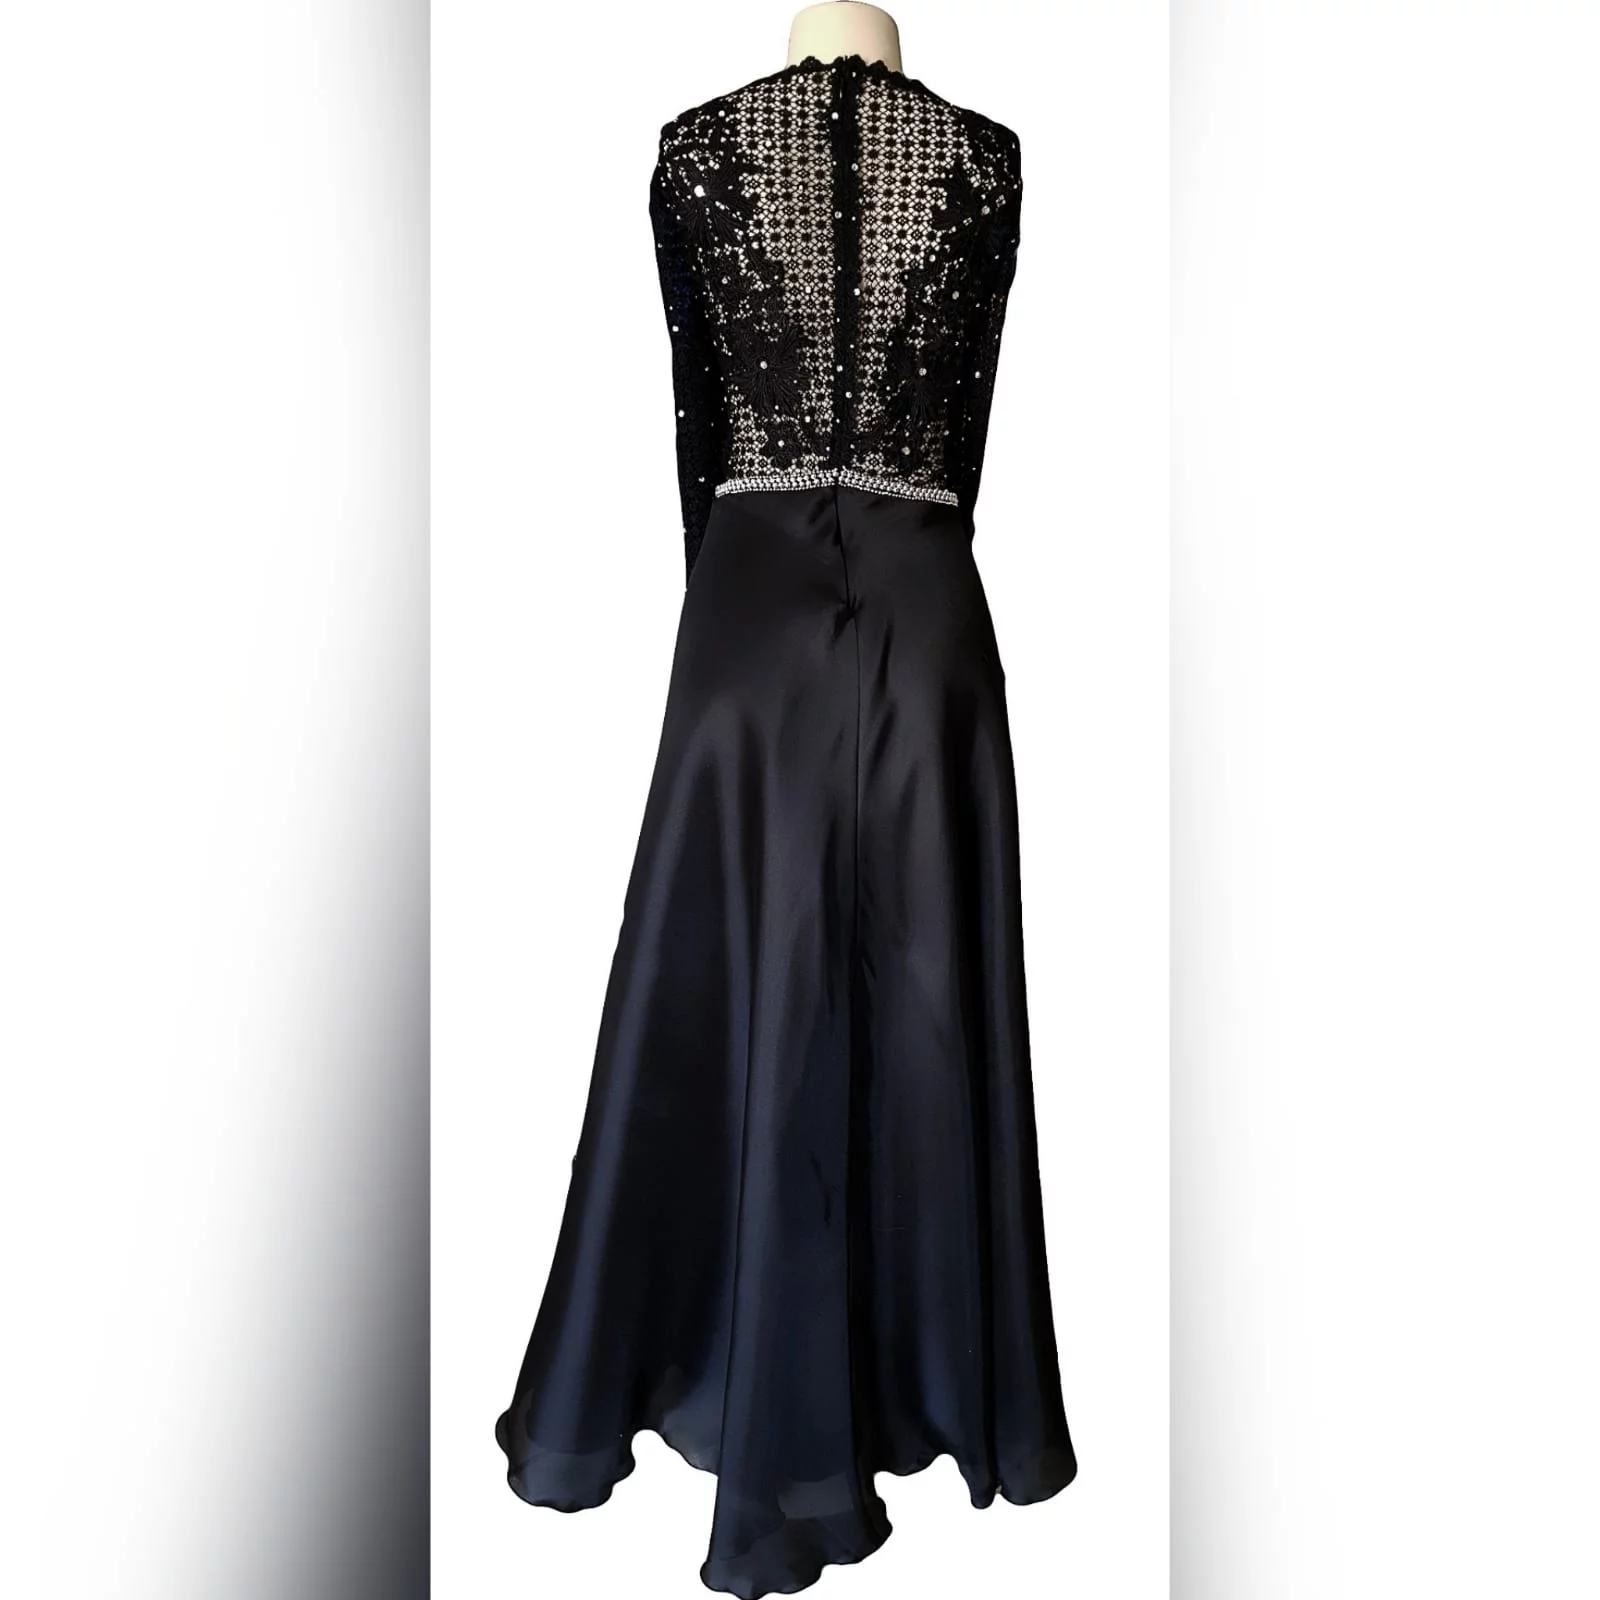 Black prom dress with a lace bodice 9 an elegant design created for a prom night. Black prom dress with a lace bodice with a slight sheer look detailed with silver beads and waist belt. Round neckline and long sleeves bottom flowy in a bridal organza